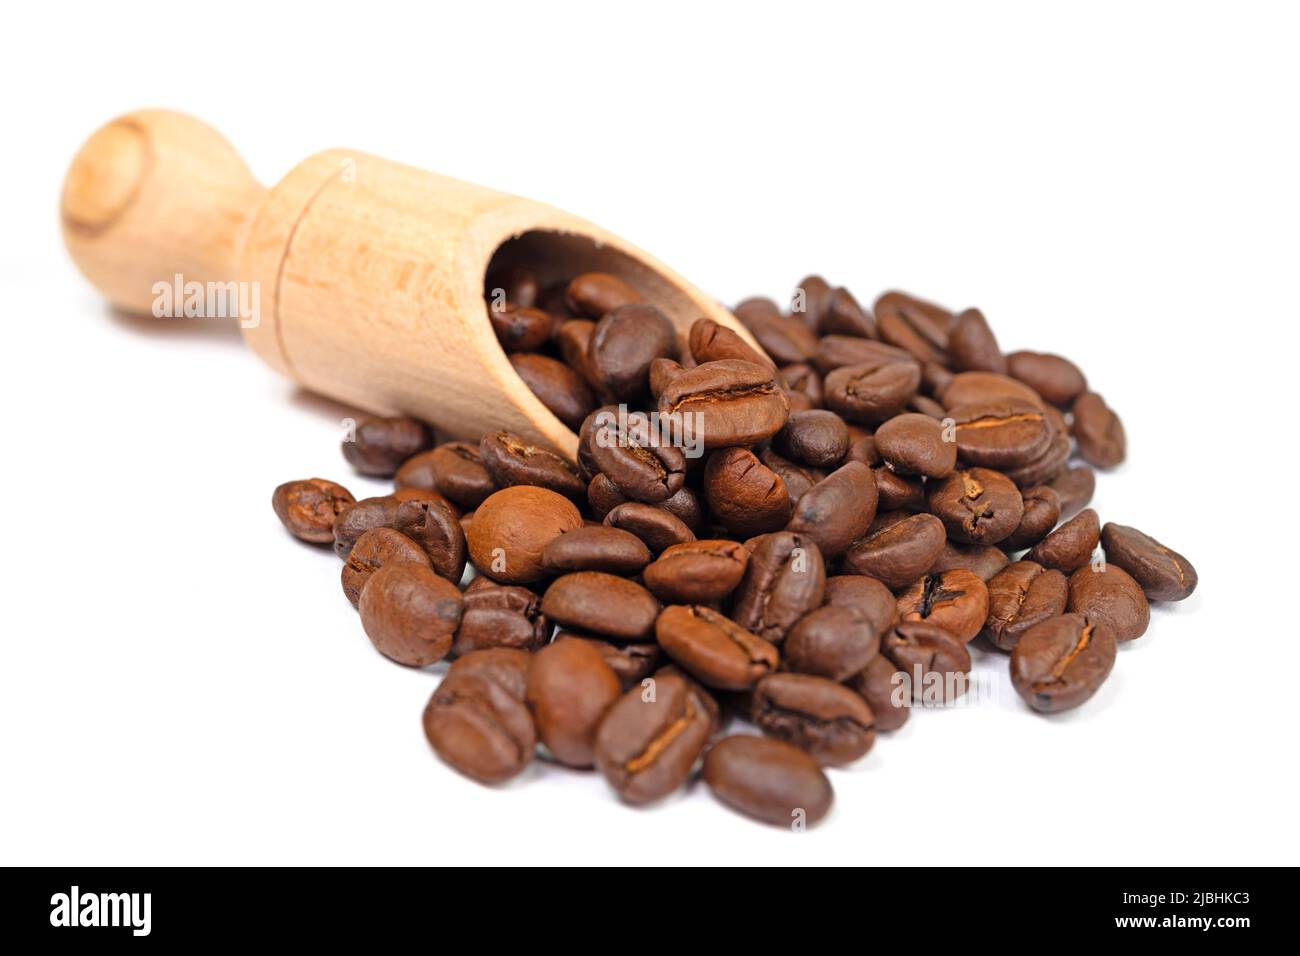 Roasted coffee beans against white background Stock Photo